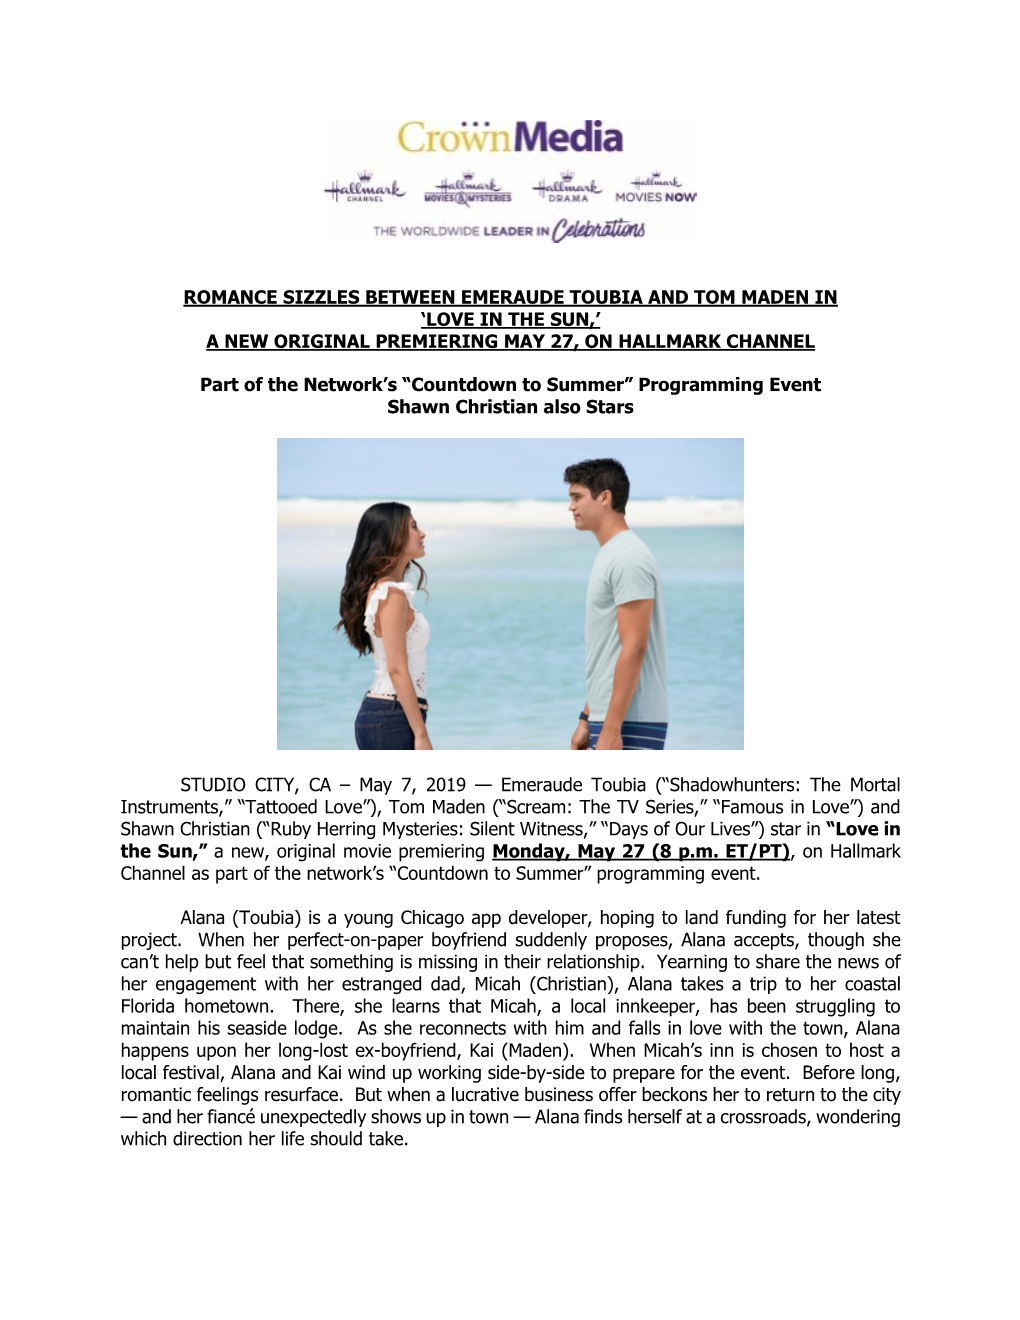 Romance Sizzles Between Emeraude Toubia and Tom Maden in ‘Love in the Sun,’ a New Original Premiering May 27, on Hallmark Channel